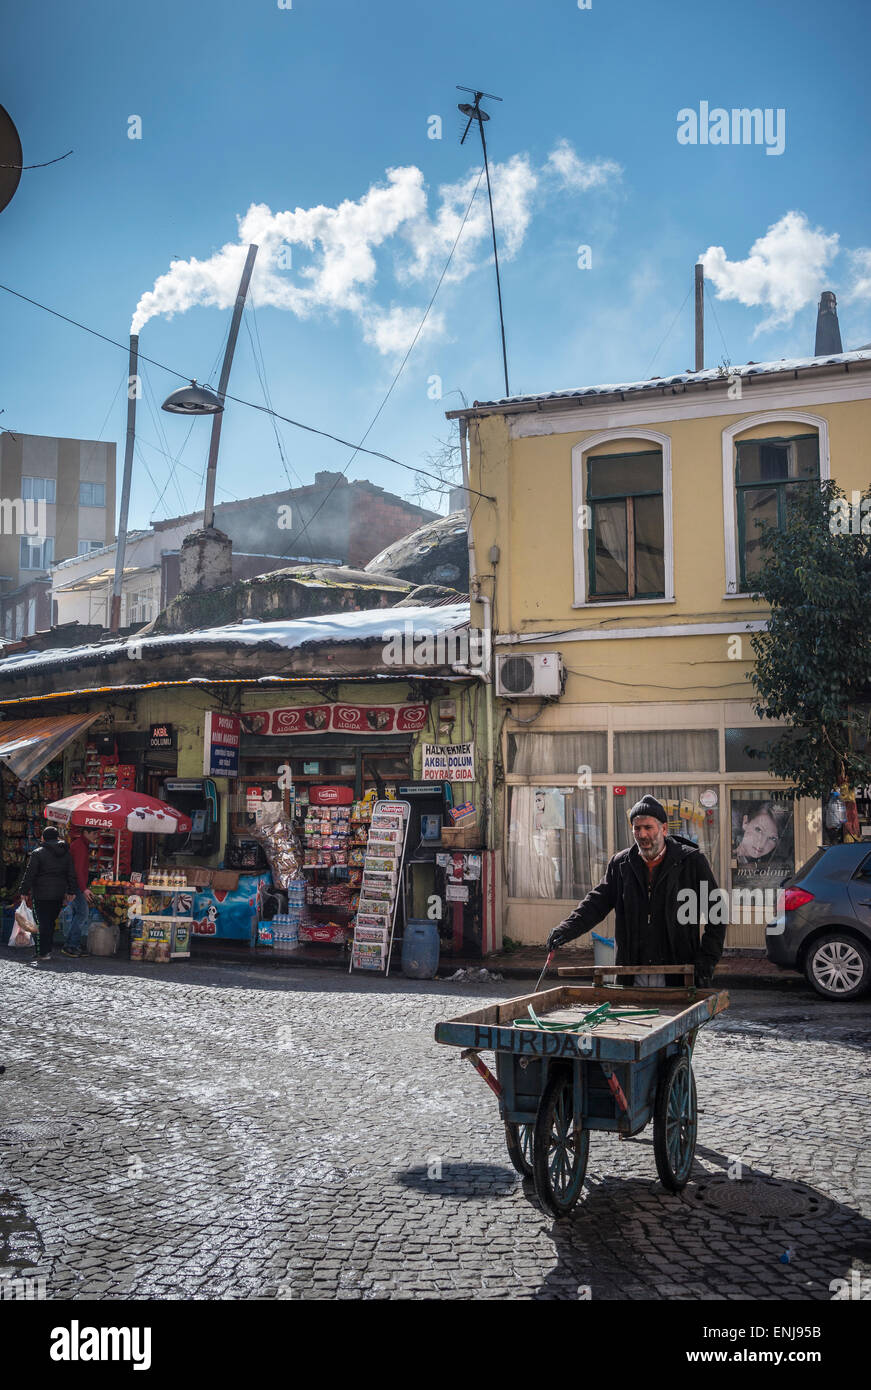 Street scene with  Steam/smoke escaping from stove pipes above the Tahtali Minare hamam in the Balat / Fener neighbourhood of Is Stock Photo